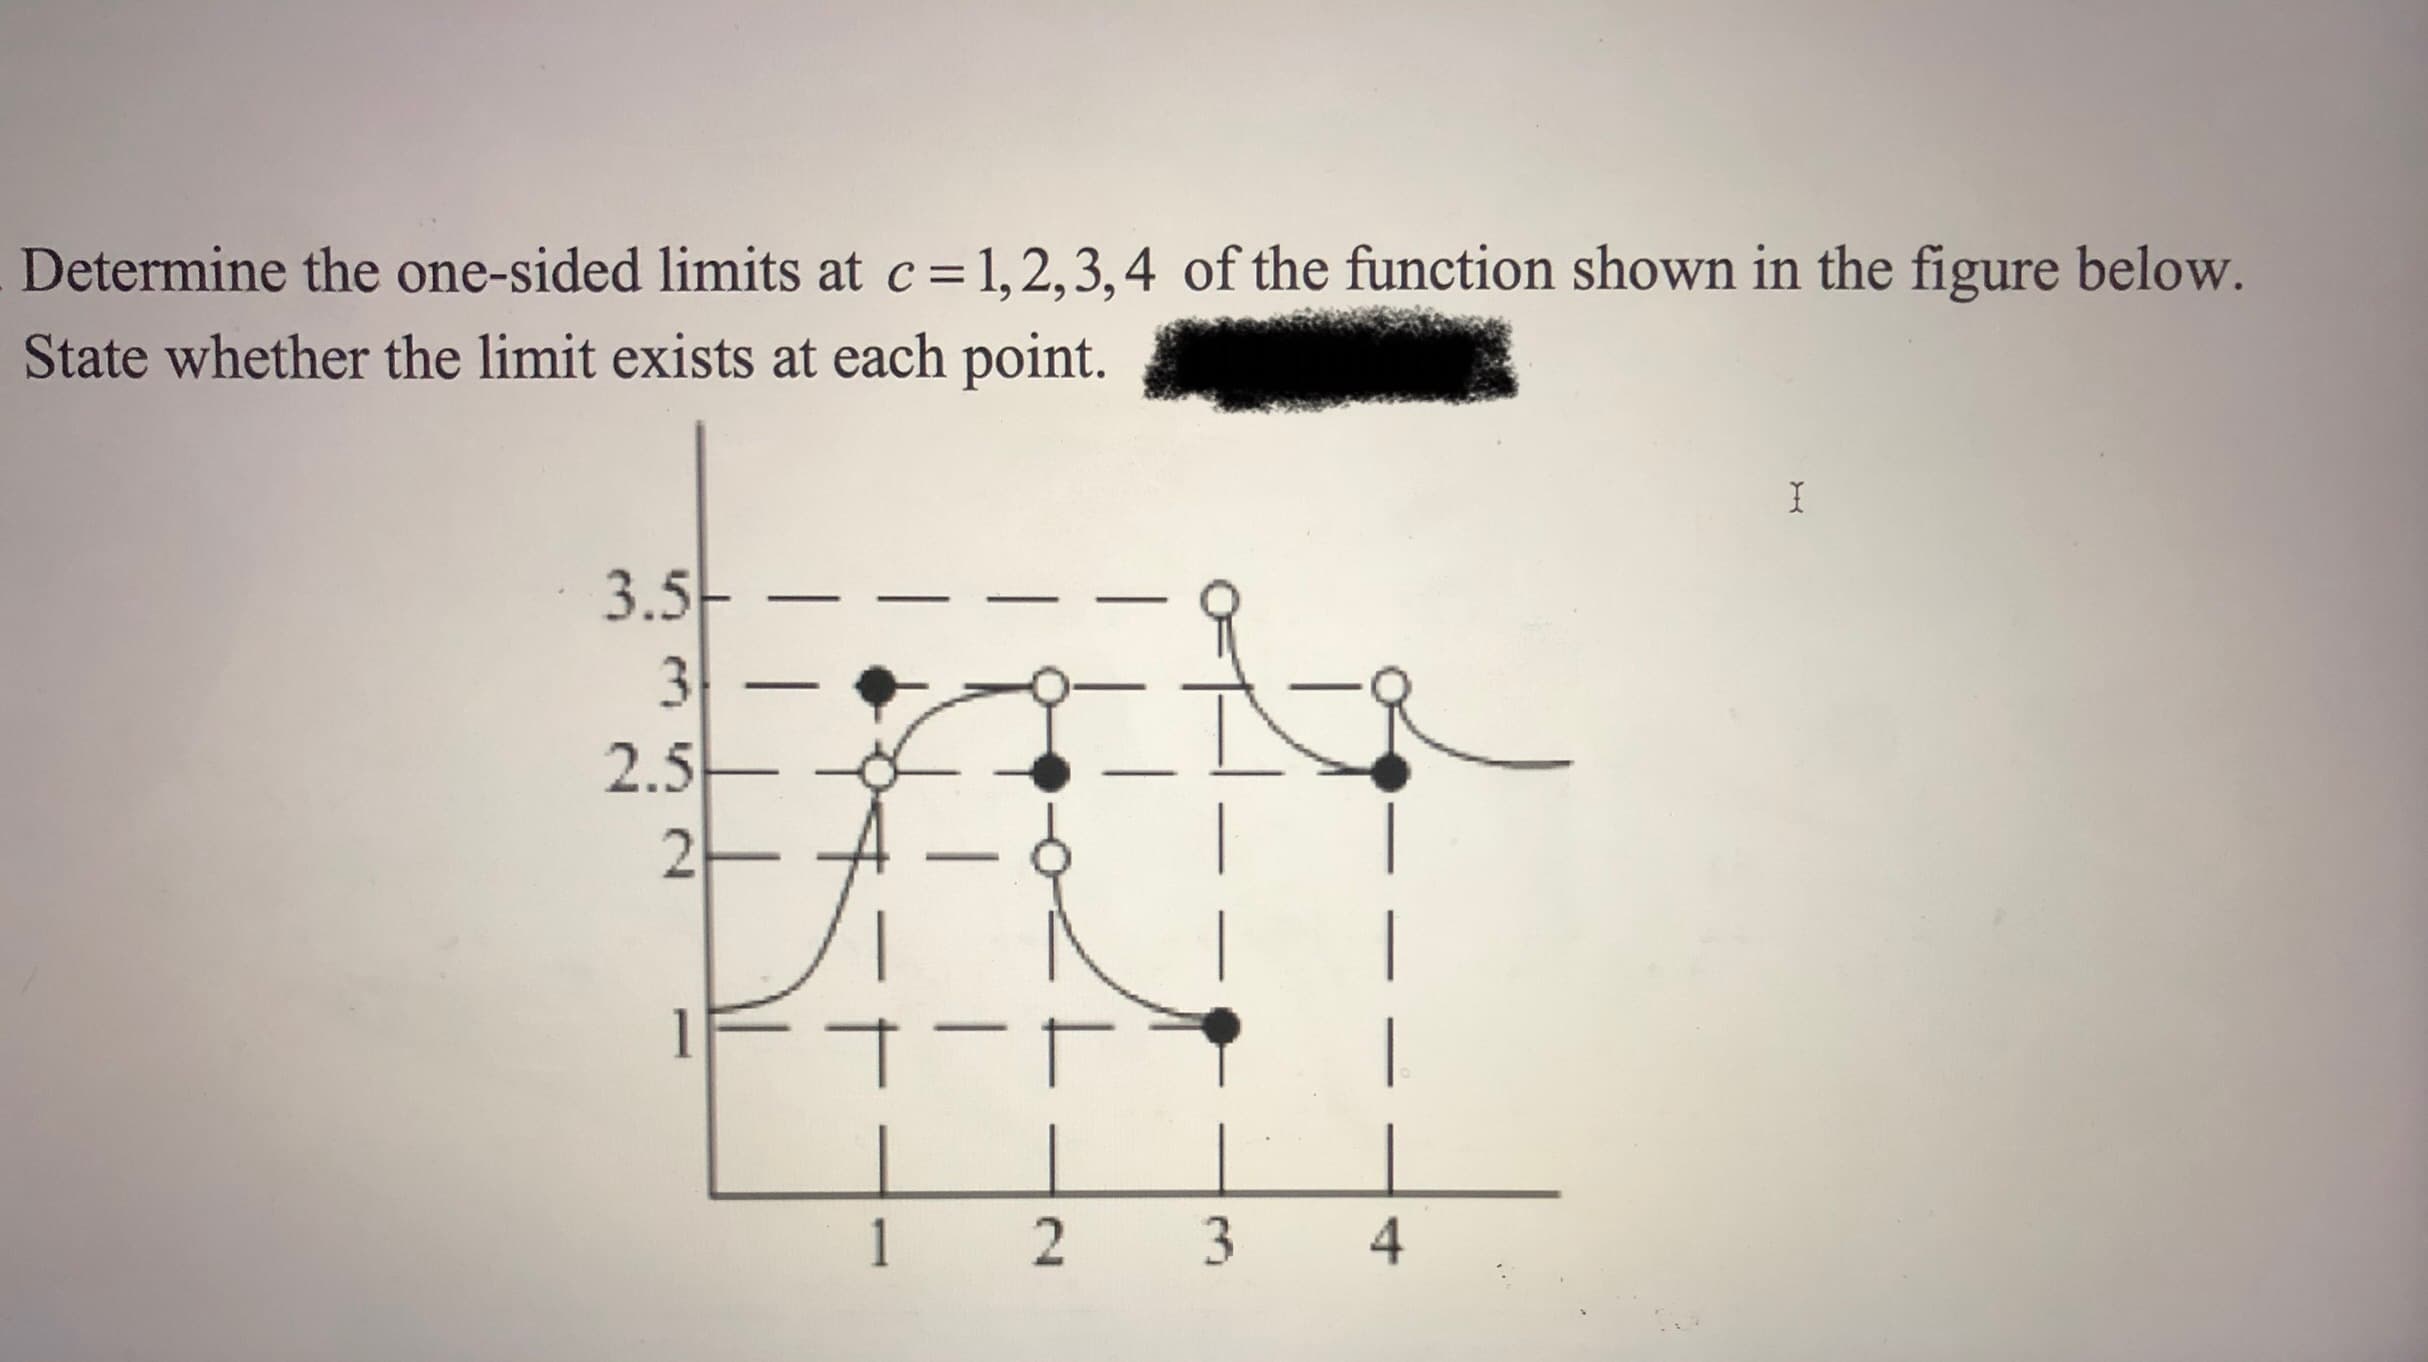 Determine the one-sided limits at c=1,2,3,4 of the function shown in the figure below.
State whether the limit exists at each point.
3.5-
3
2.5-
4
3.
2.
2.
%3D
